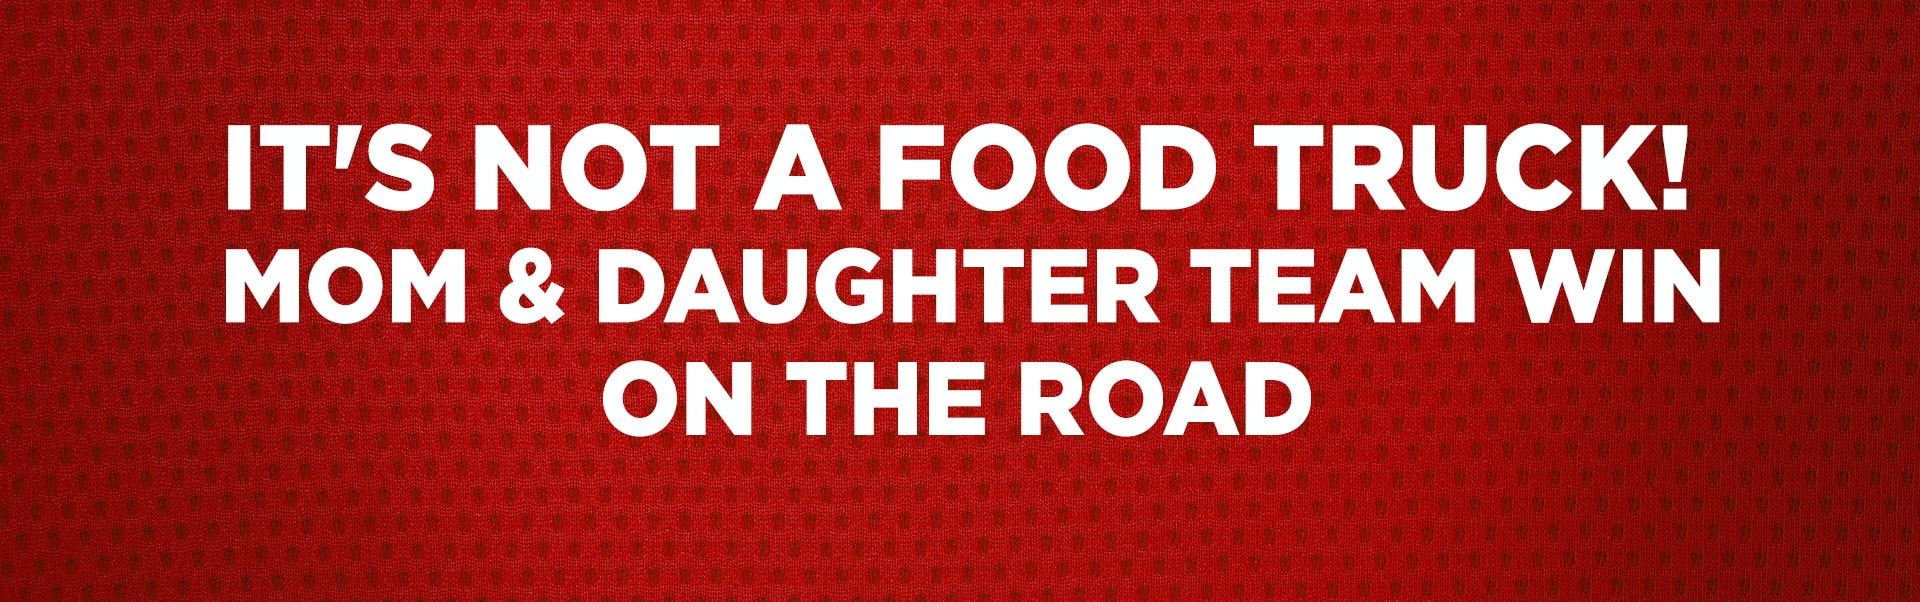 It’s NOT a Food Truck! | Mom & Daughter Team Win on the Road